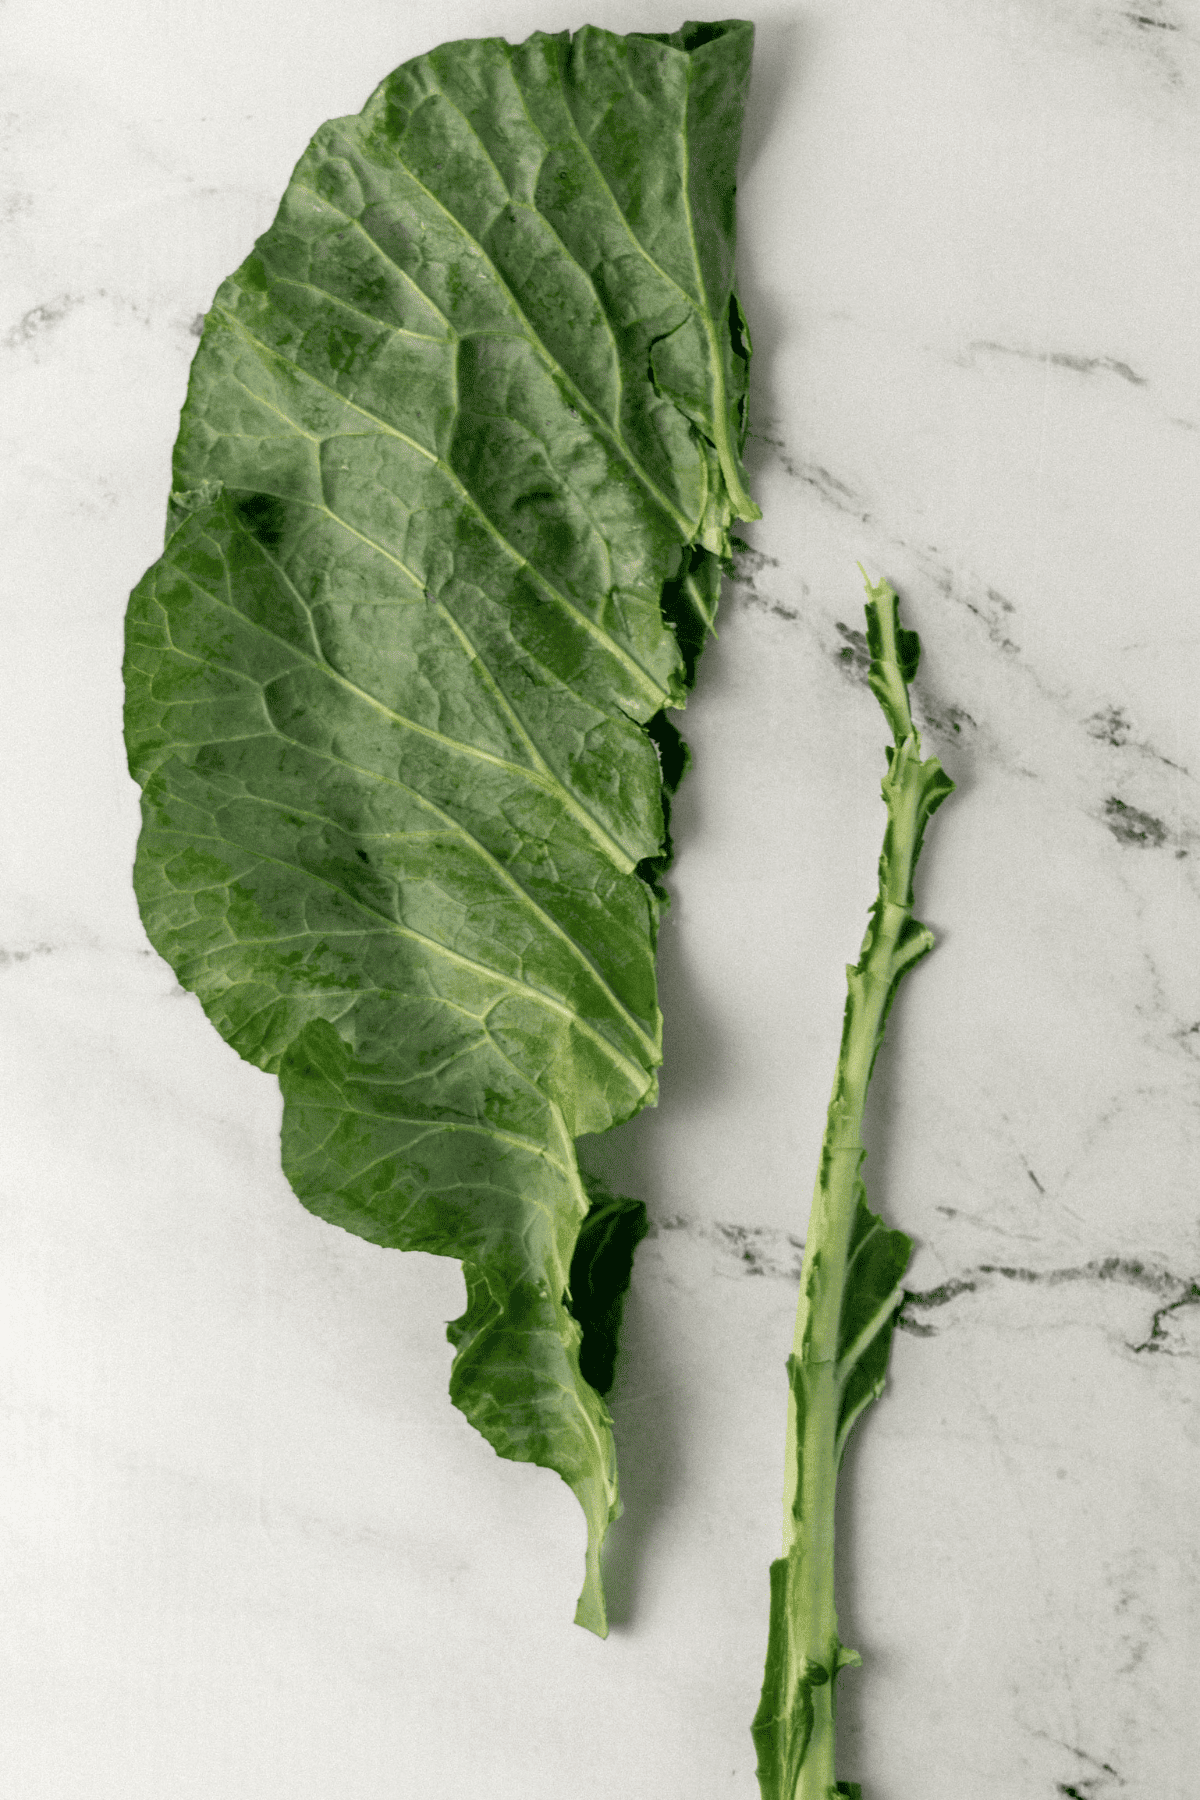 green leaf folded in half with stem removed and beside it